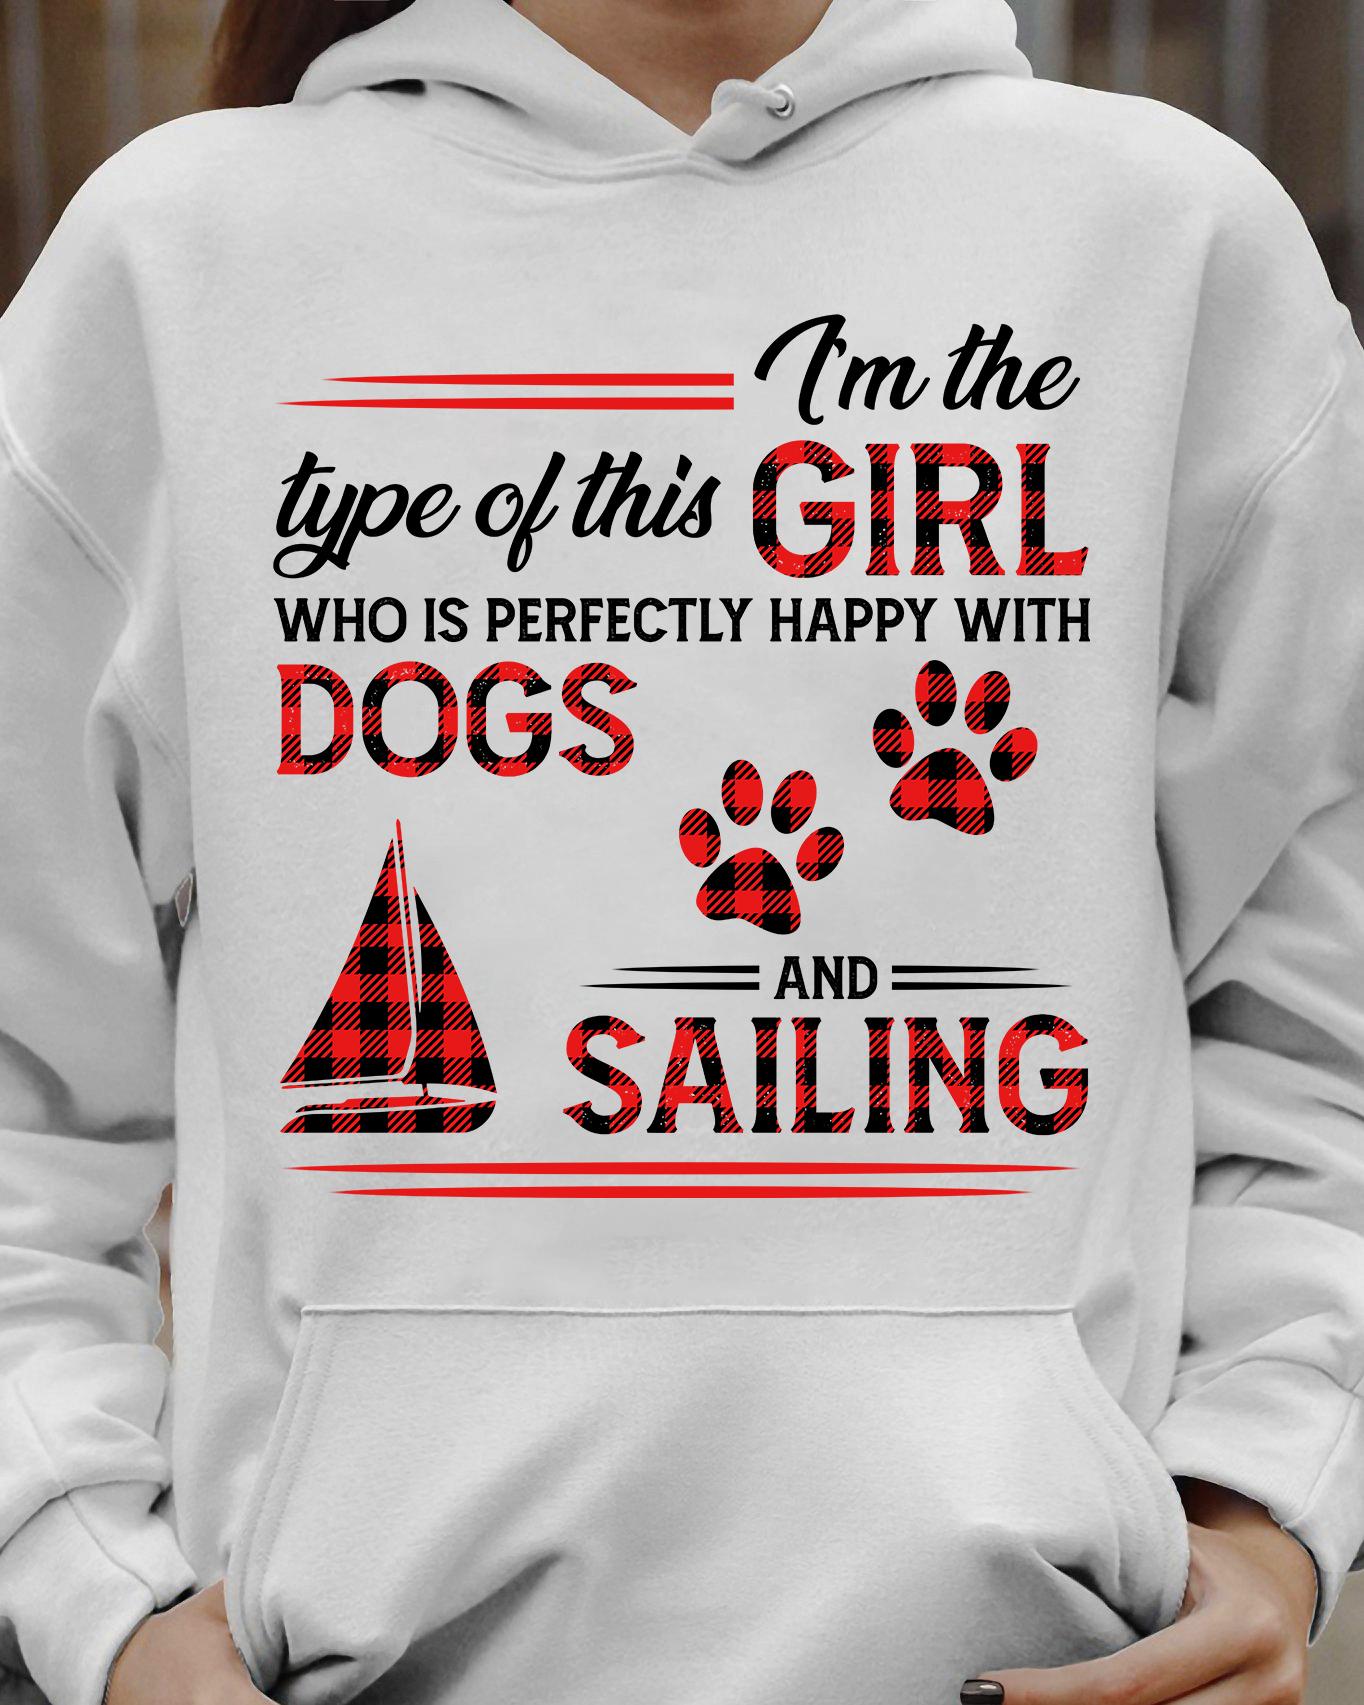 I'm the type of this girl who is perfectly happy with dogs and sailing - Girl go sailing, dog lover gift